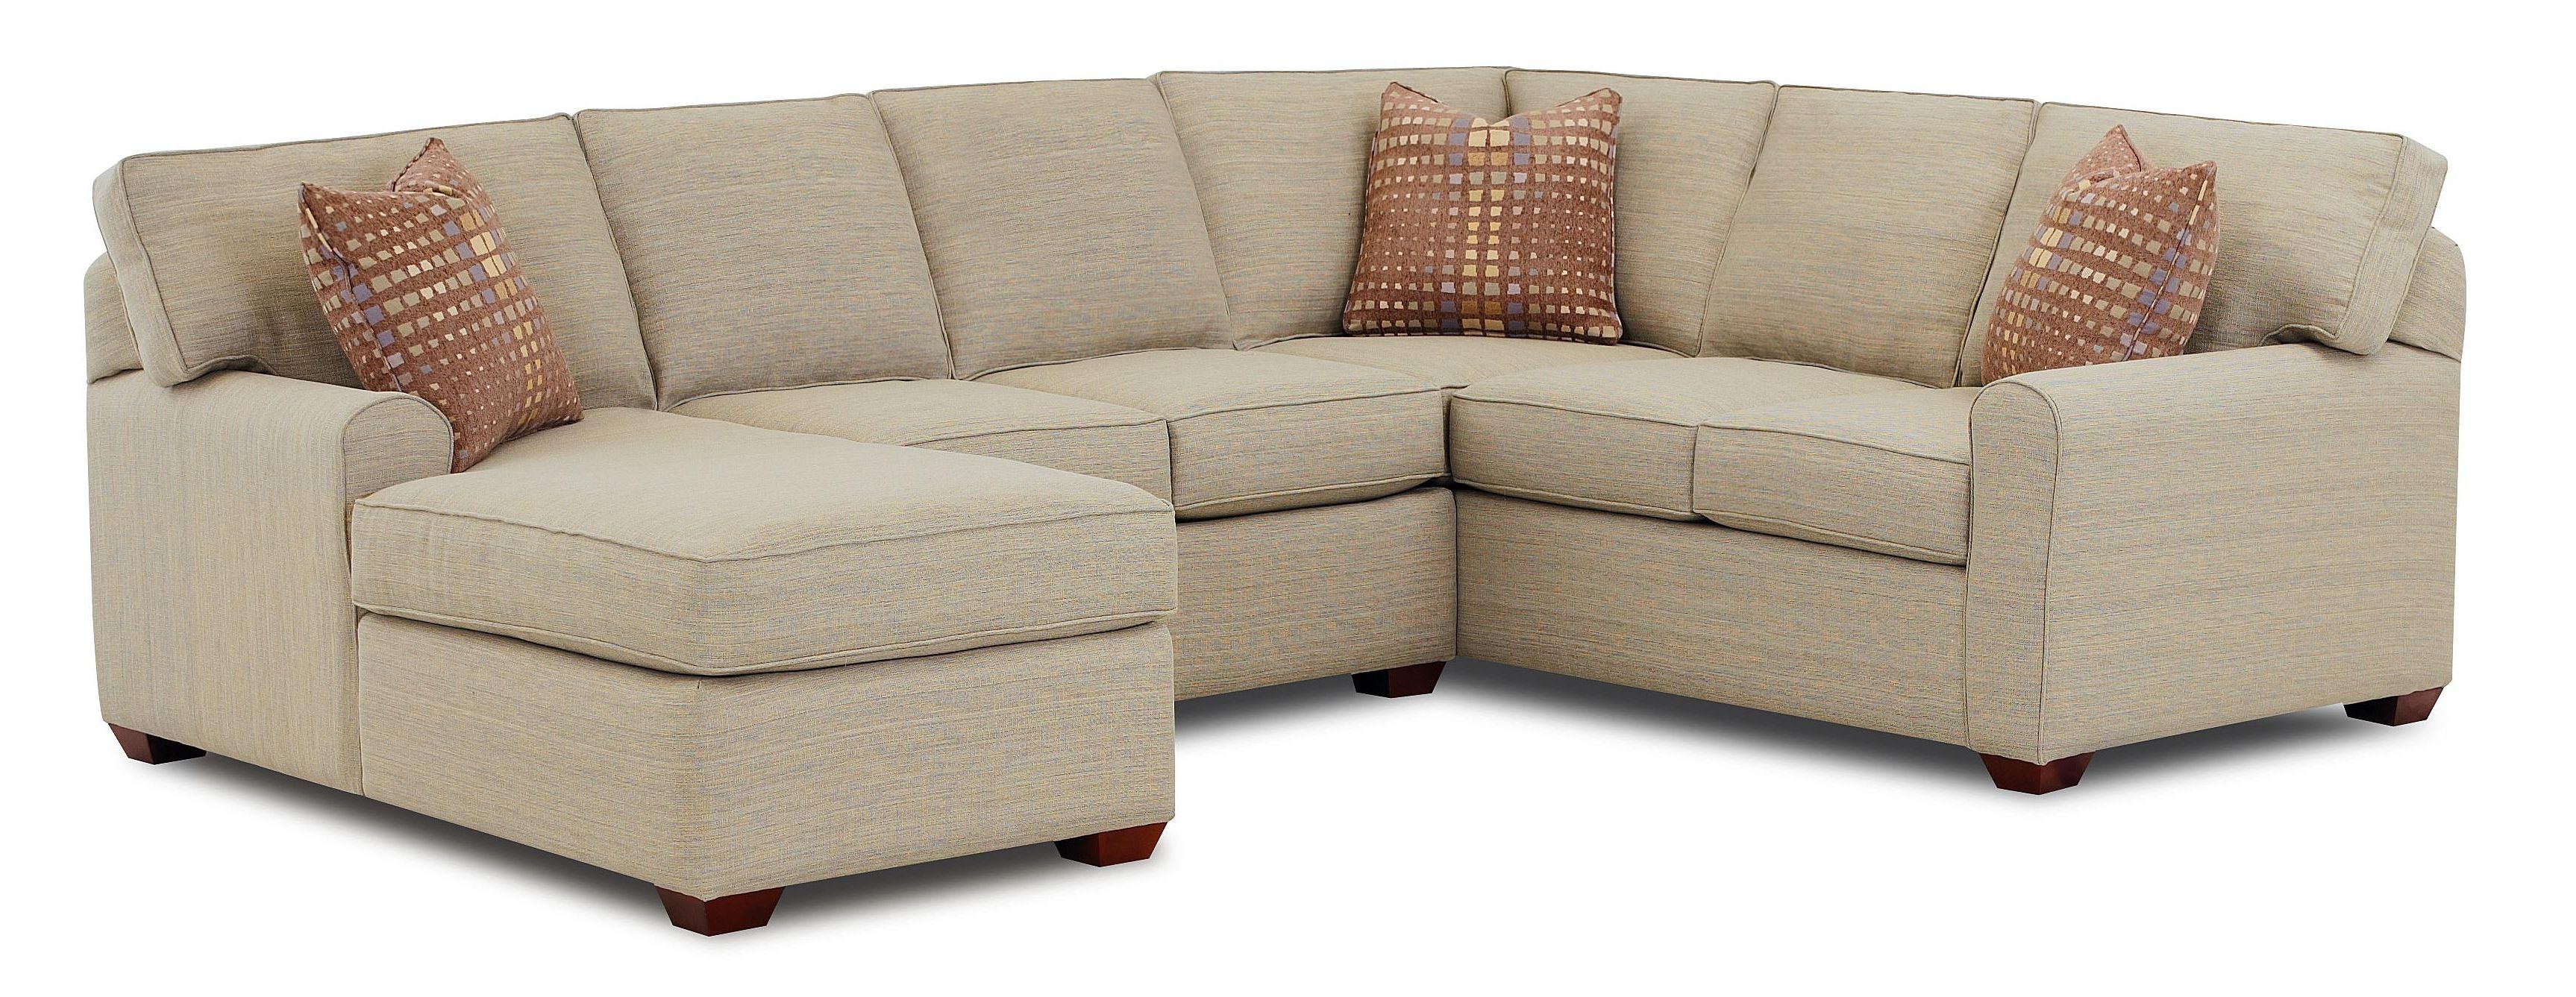 Most Up To Date Klaussner Hybrid Sectional Sofa With Right Facing Chaise Lounge Inside Chaise Sectional Sofas (View 7 of 15)